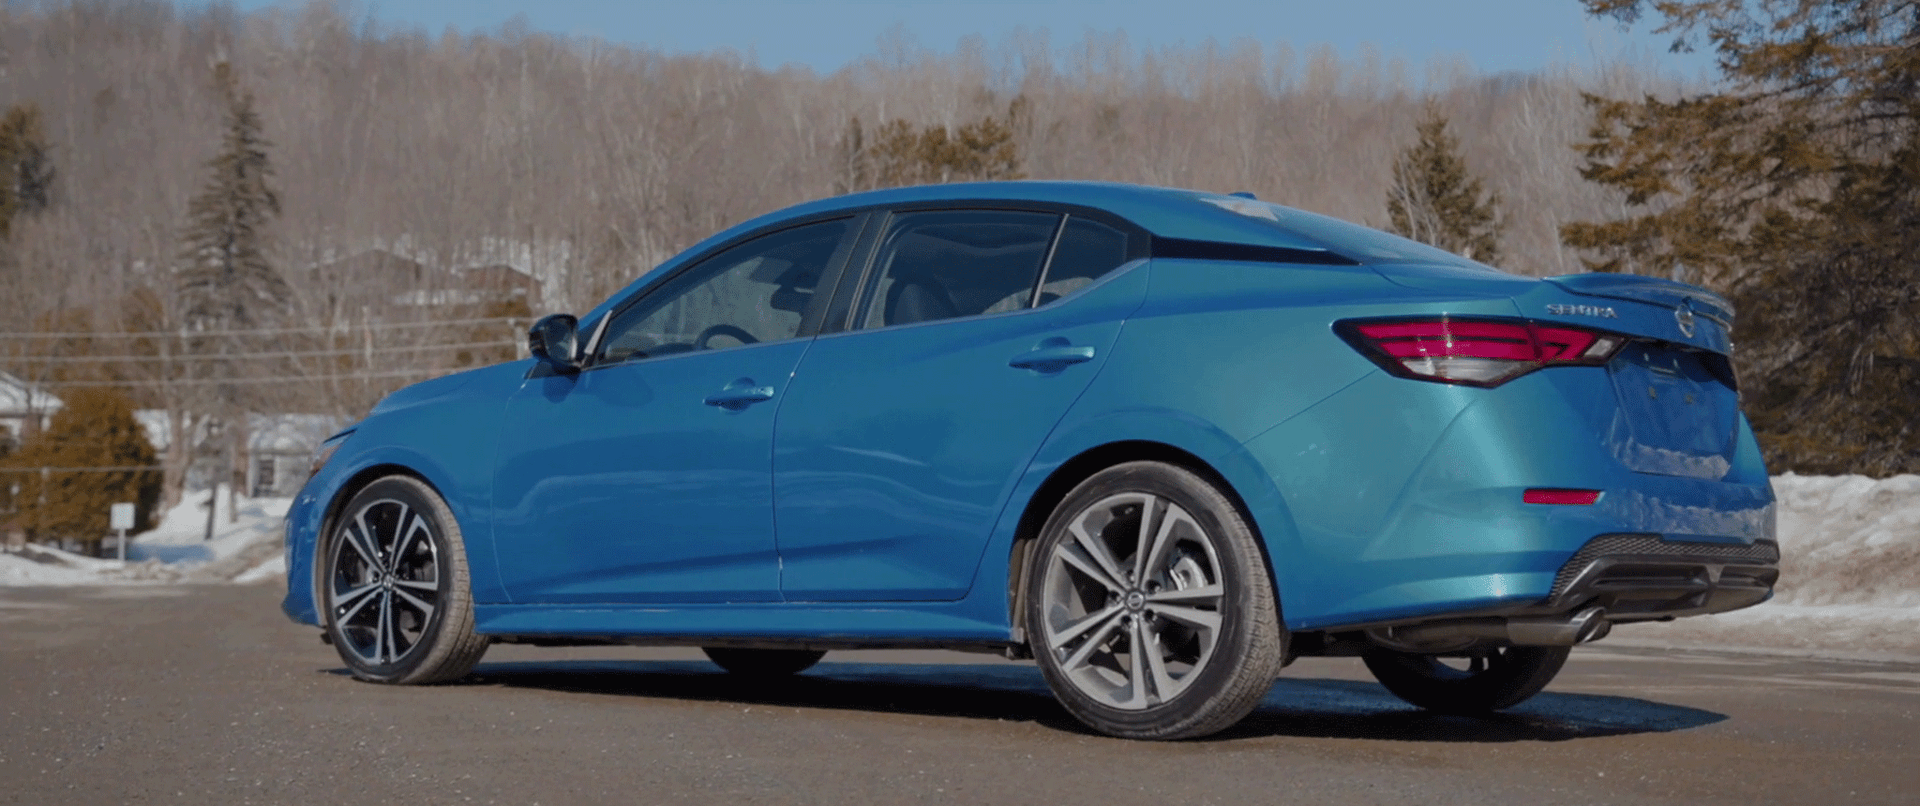 Groupe beaucage article nissan sentra 2020 21 2